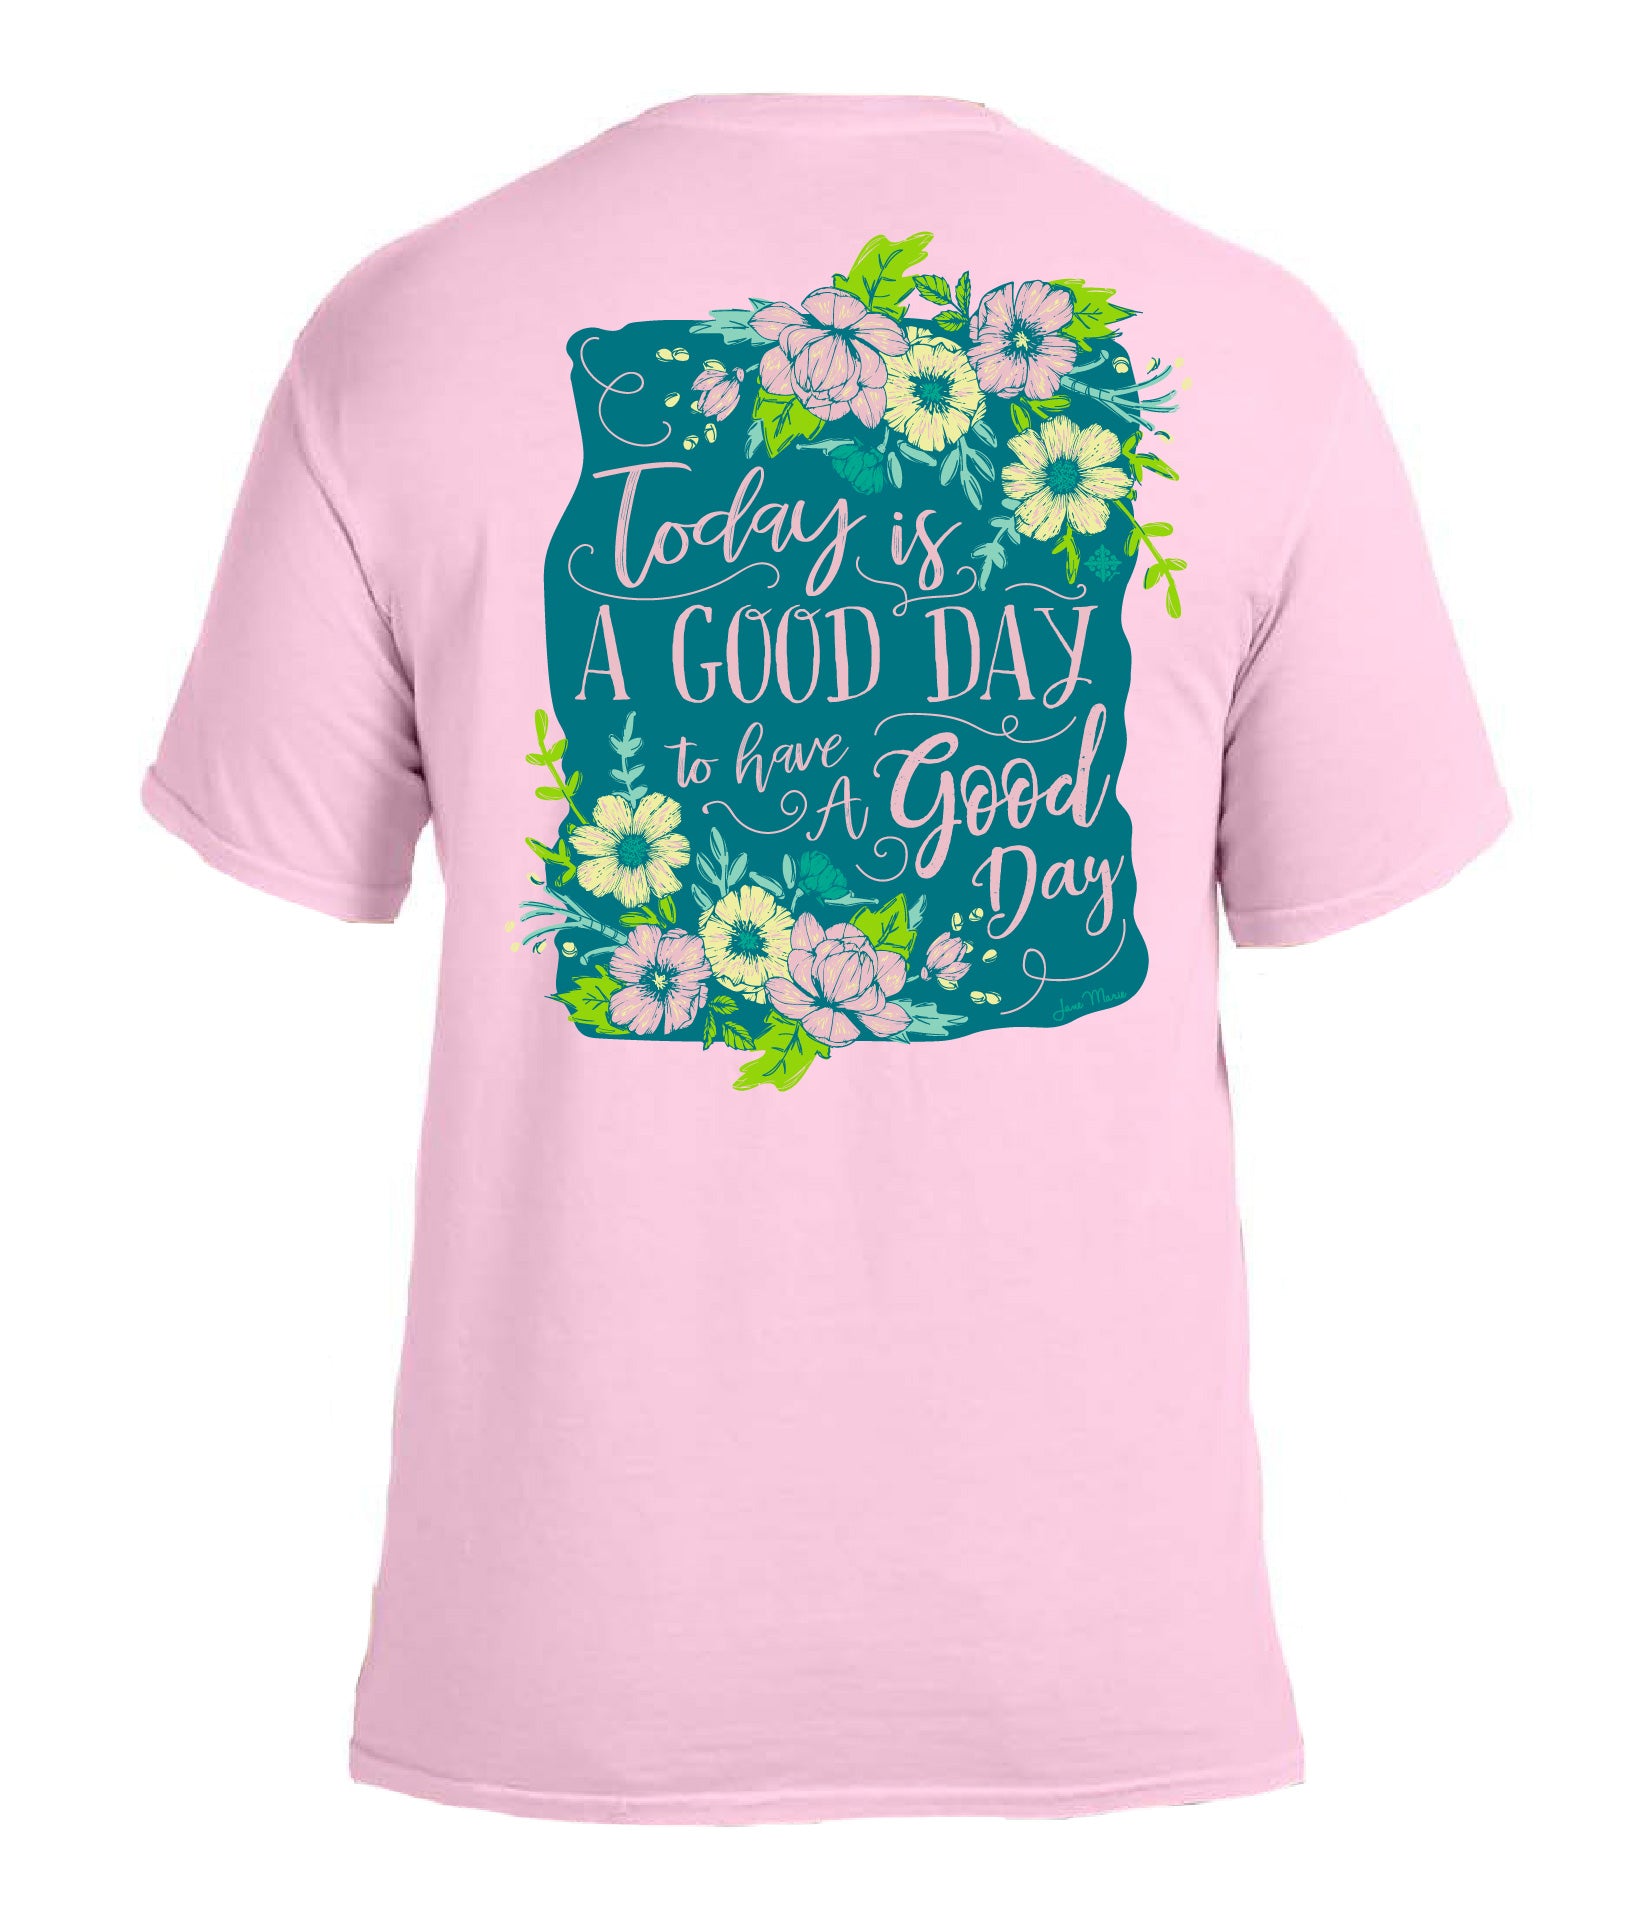 Today Is A Good Day For A Good Day-2XL